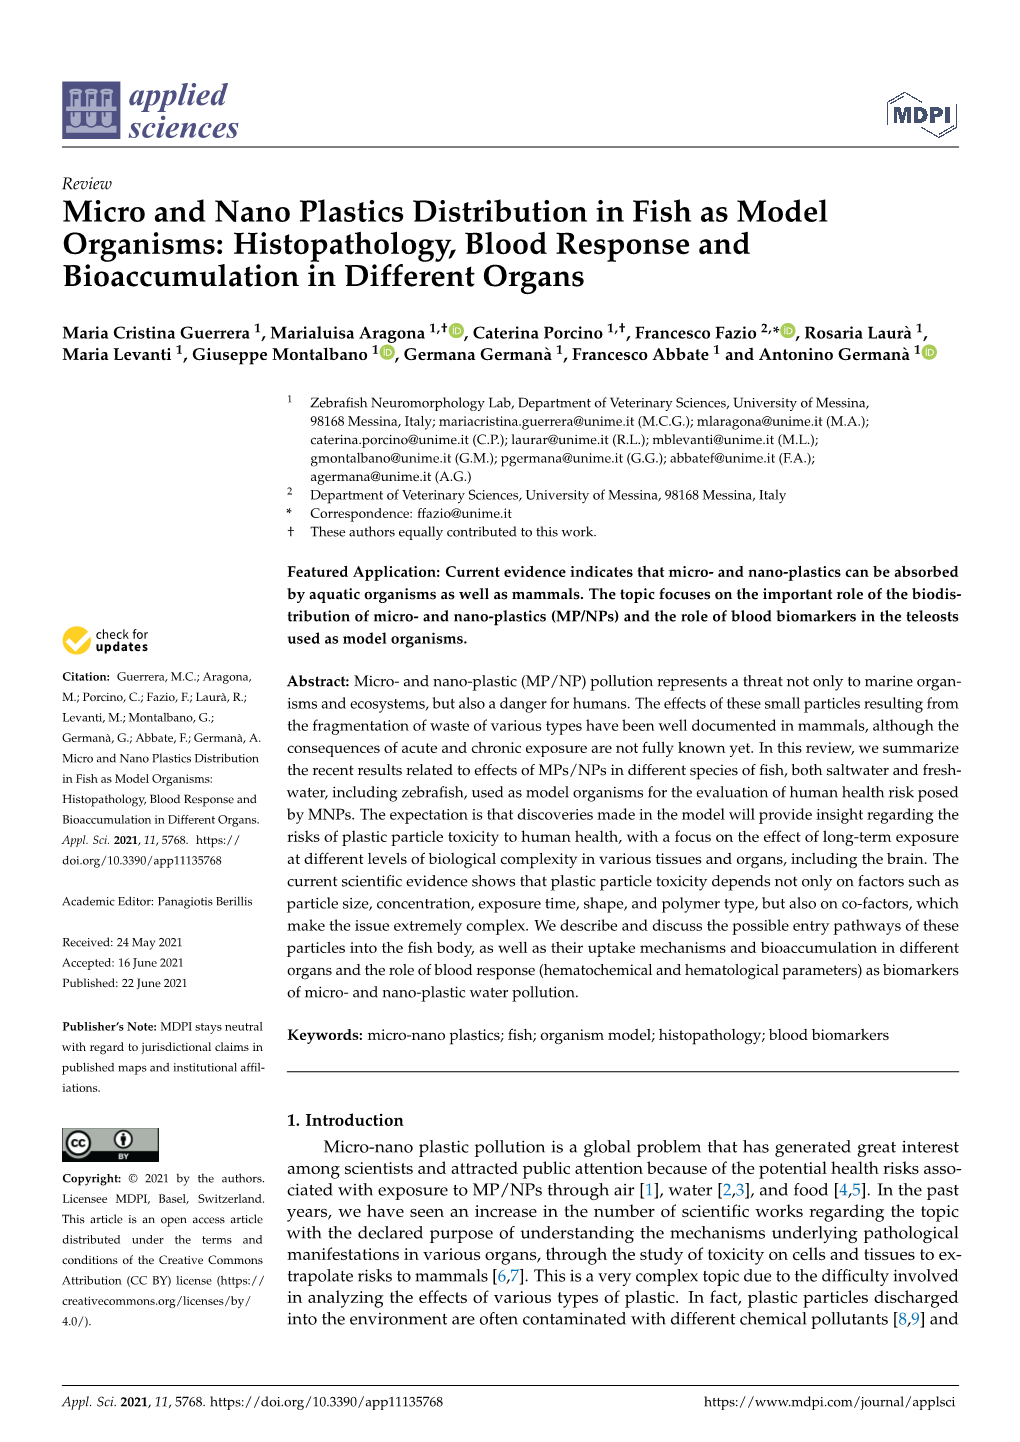 Micro and Nano Plastics Distribution in Fish As Model Organisms: Histopathology, Blood Response and Bioaccumulation in Different Organs